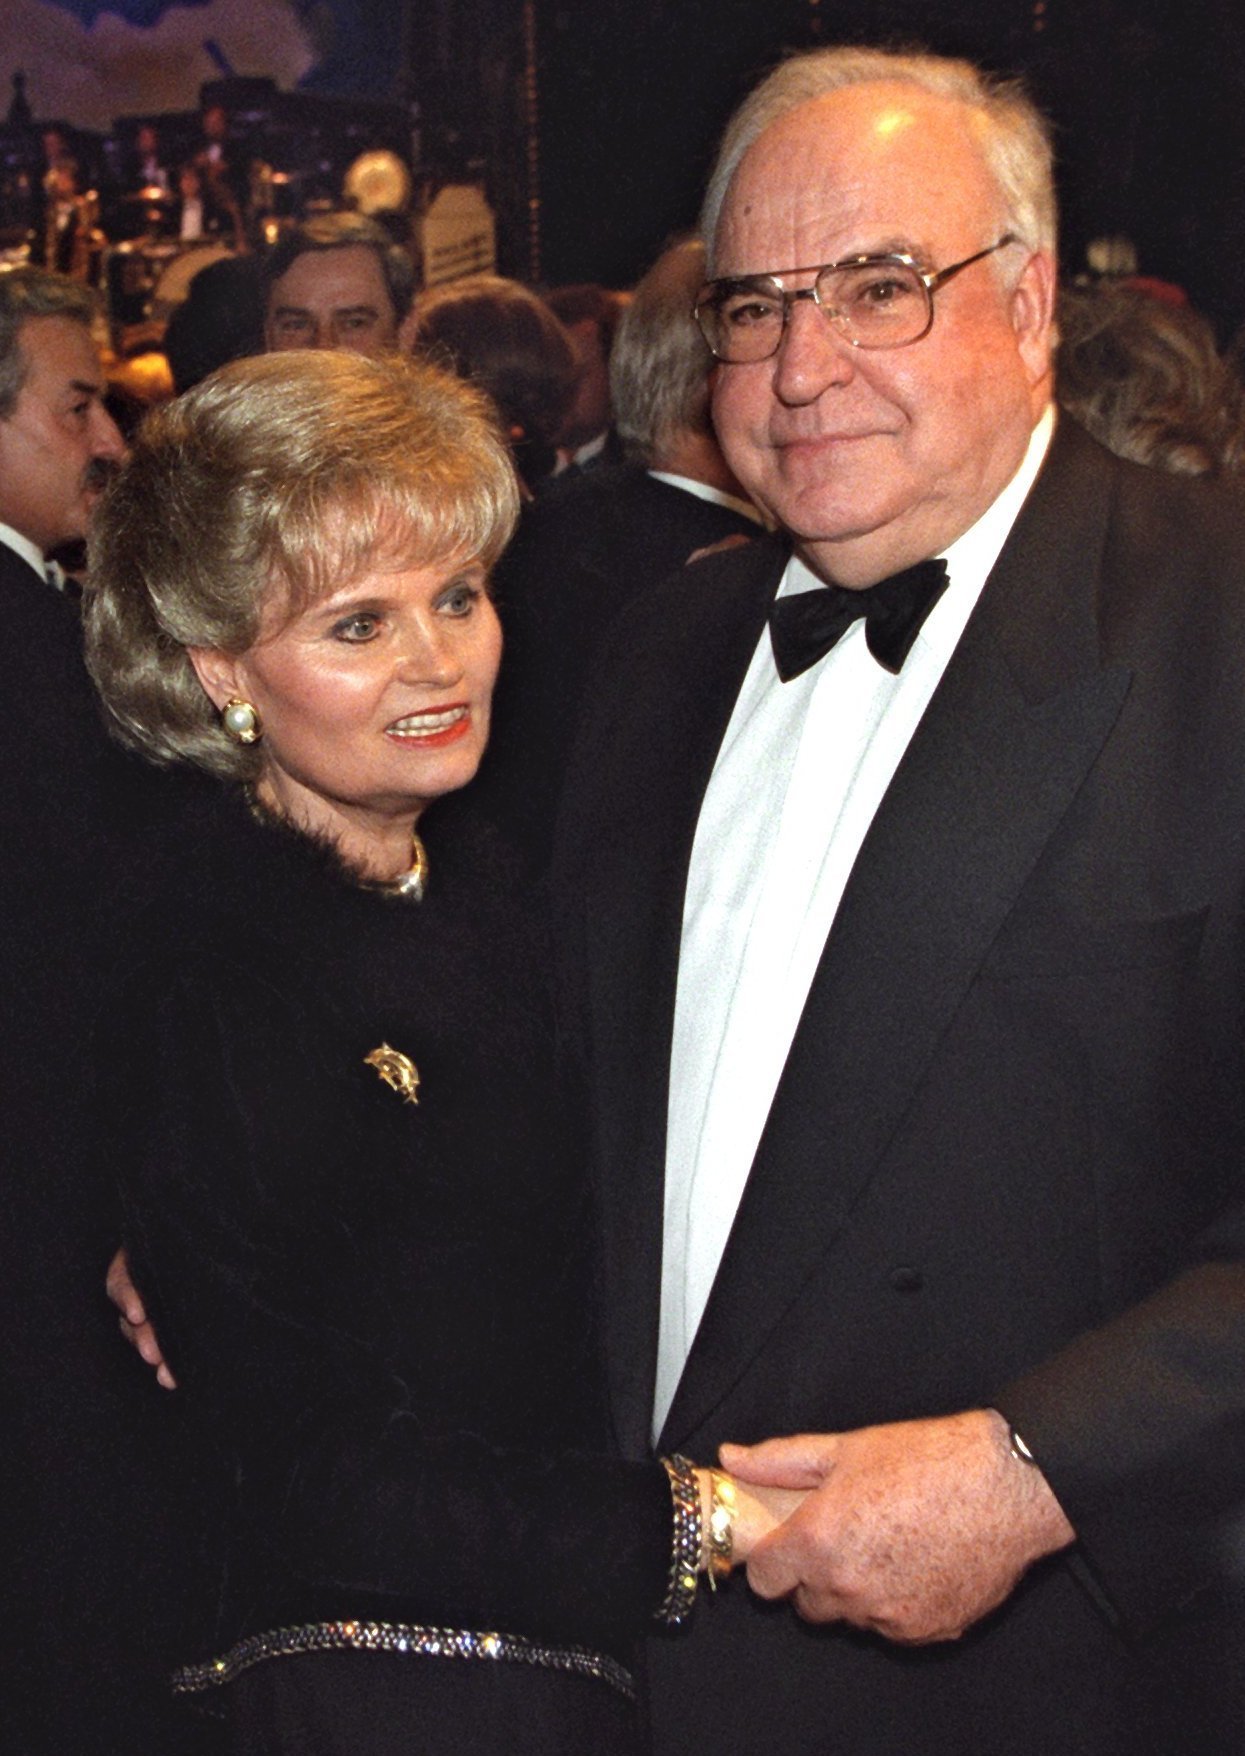 FKM17 - 19971114 - MAINZ, GERMANY : (FILES) A file photo dated 14 November 1997 of former German chancellor Helmut Kohl (R) with his wife Hannelore during a ball in Mainz. Hannelore Kohl, 68, was found dead 05 July 2001 at the Kohls home in Ludwigshafen, close to Frankfurt.   EPA PHOTO            DPA FILES/GERO BRELOER